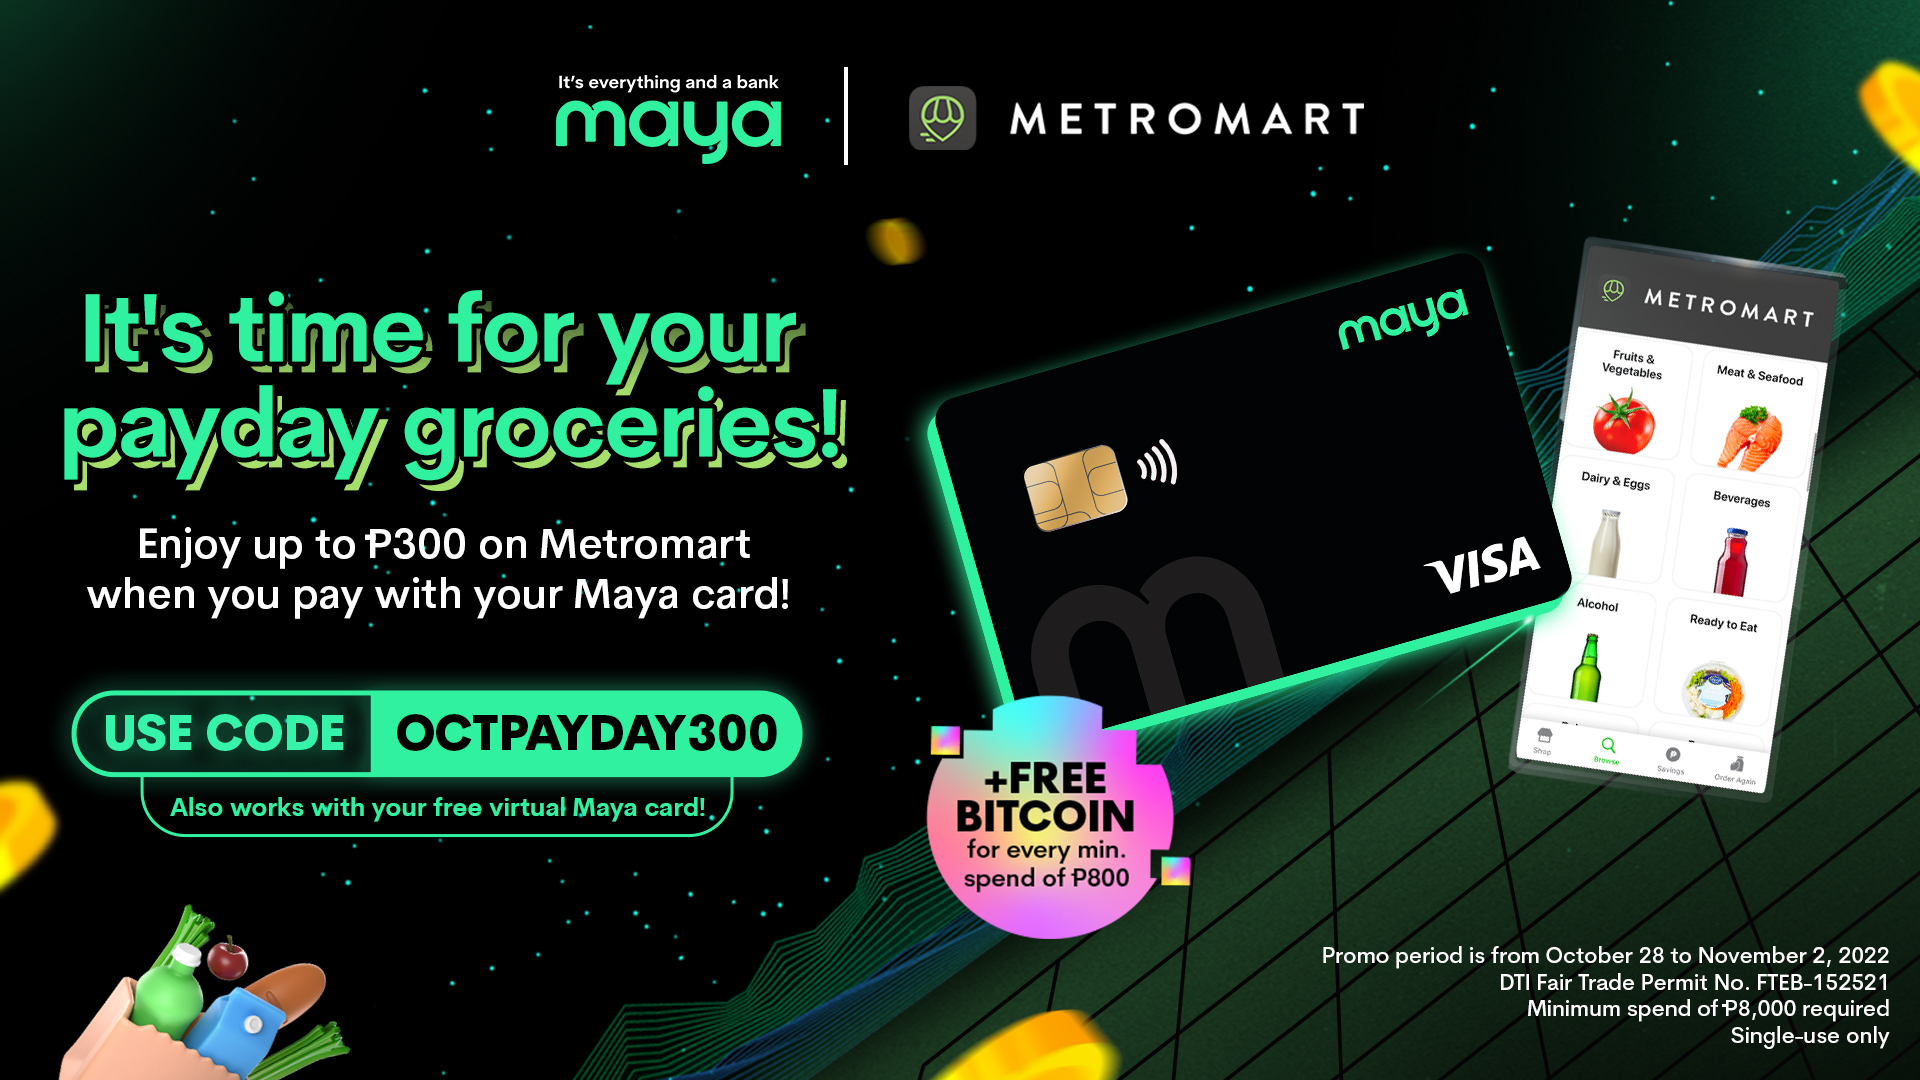 102522_Maya-VO- Metromart October 30 Payday Campaigns - Deals Page